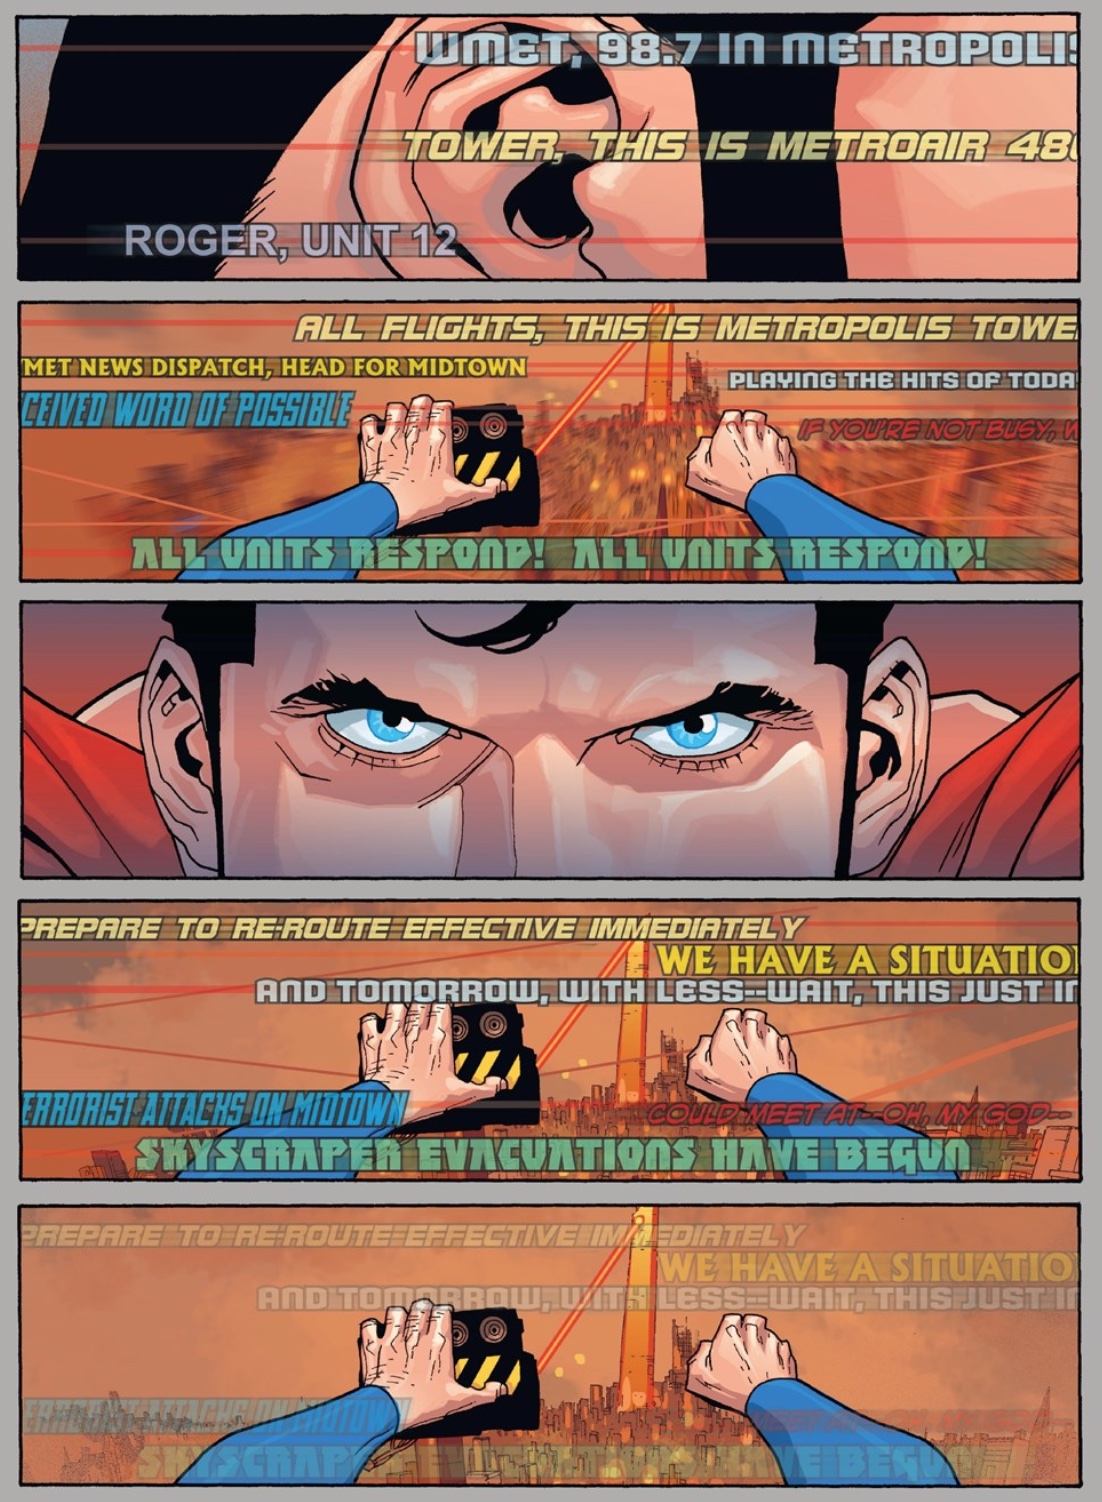 Superman collecting ultrasonic waves in Superman: Birthright Vol. 1 #05